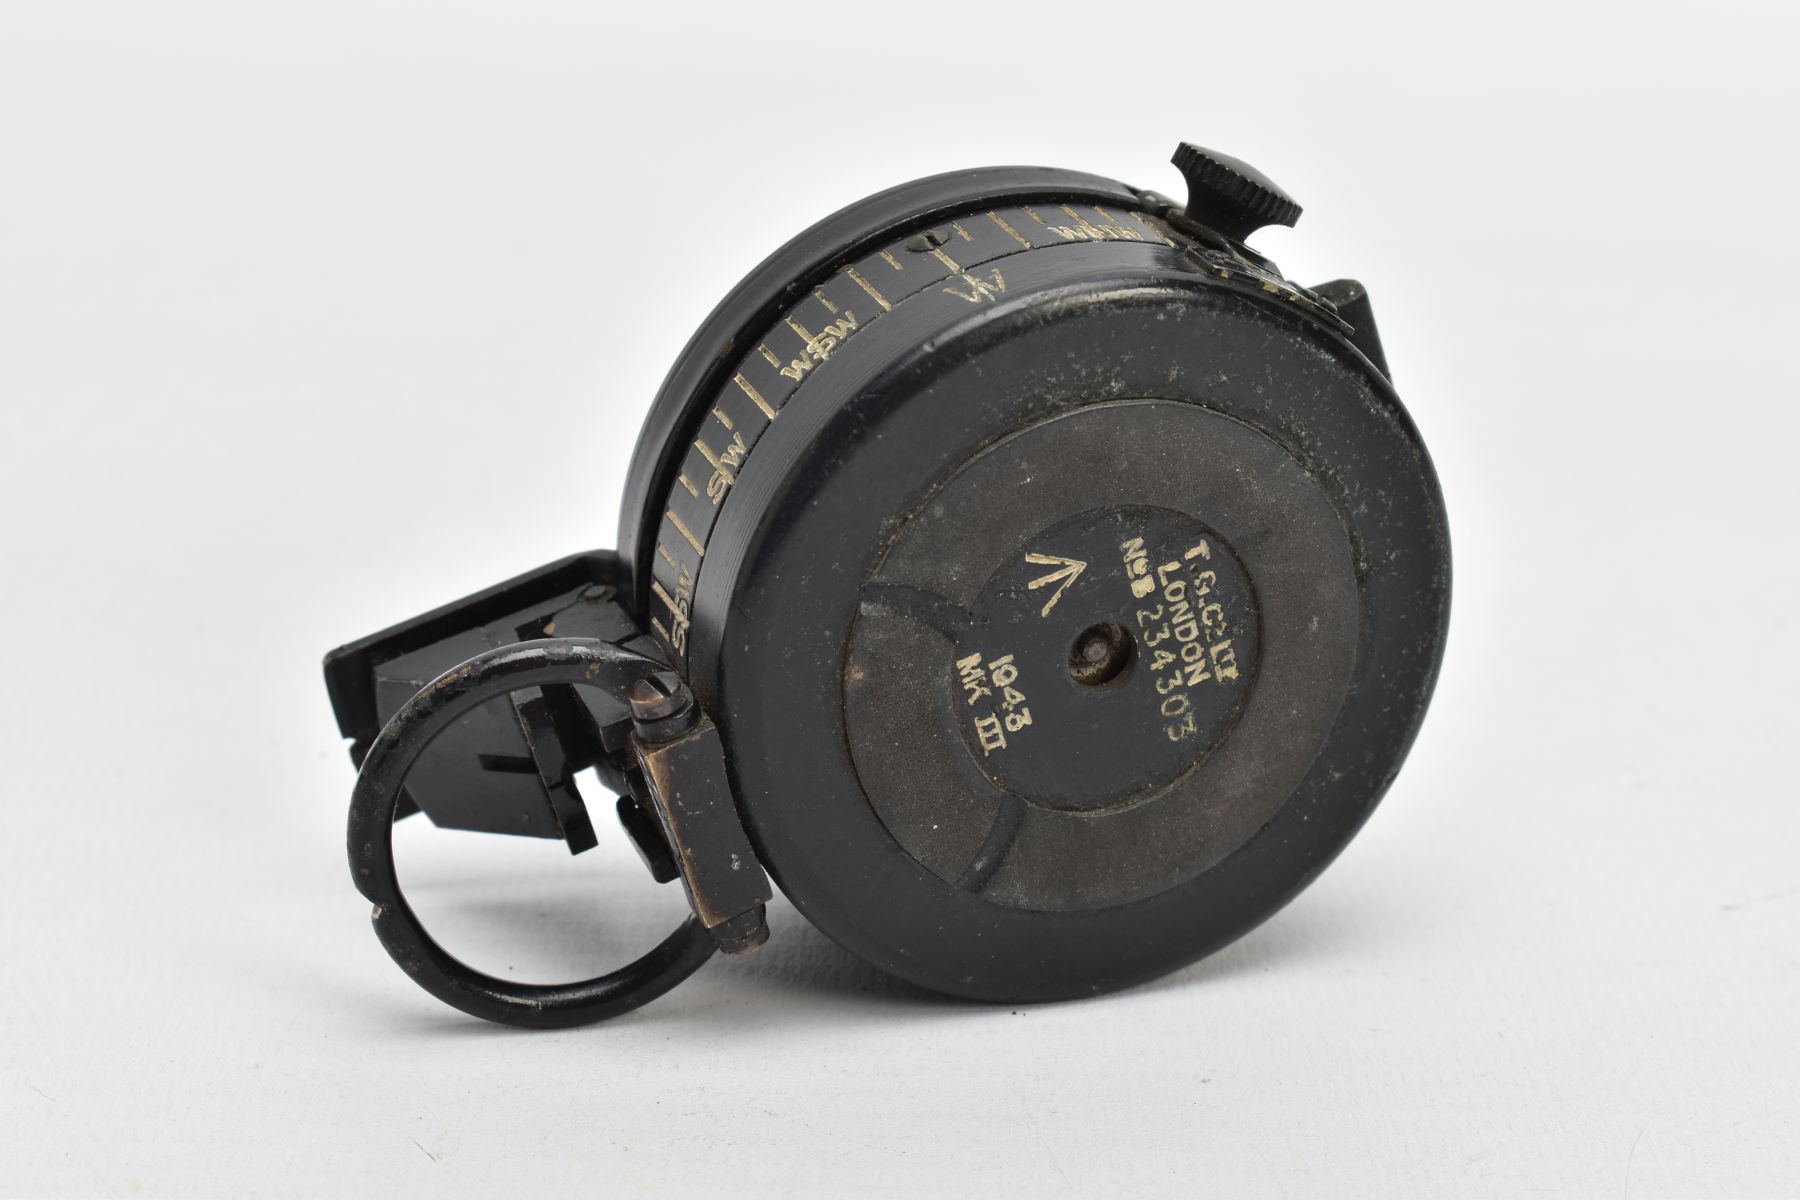 A MILITARY COMPASS, black compass, stamped T.G.C2 Ltd London number 234303, dated 1943 MK III - Image 6 of 7